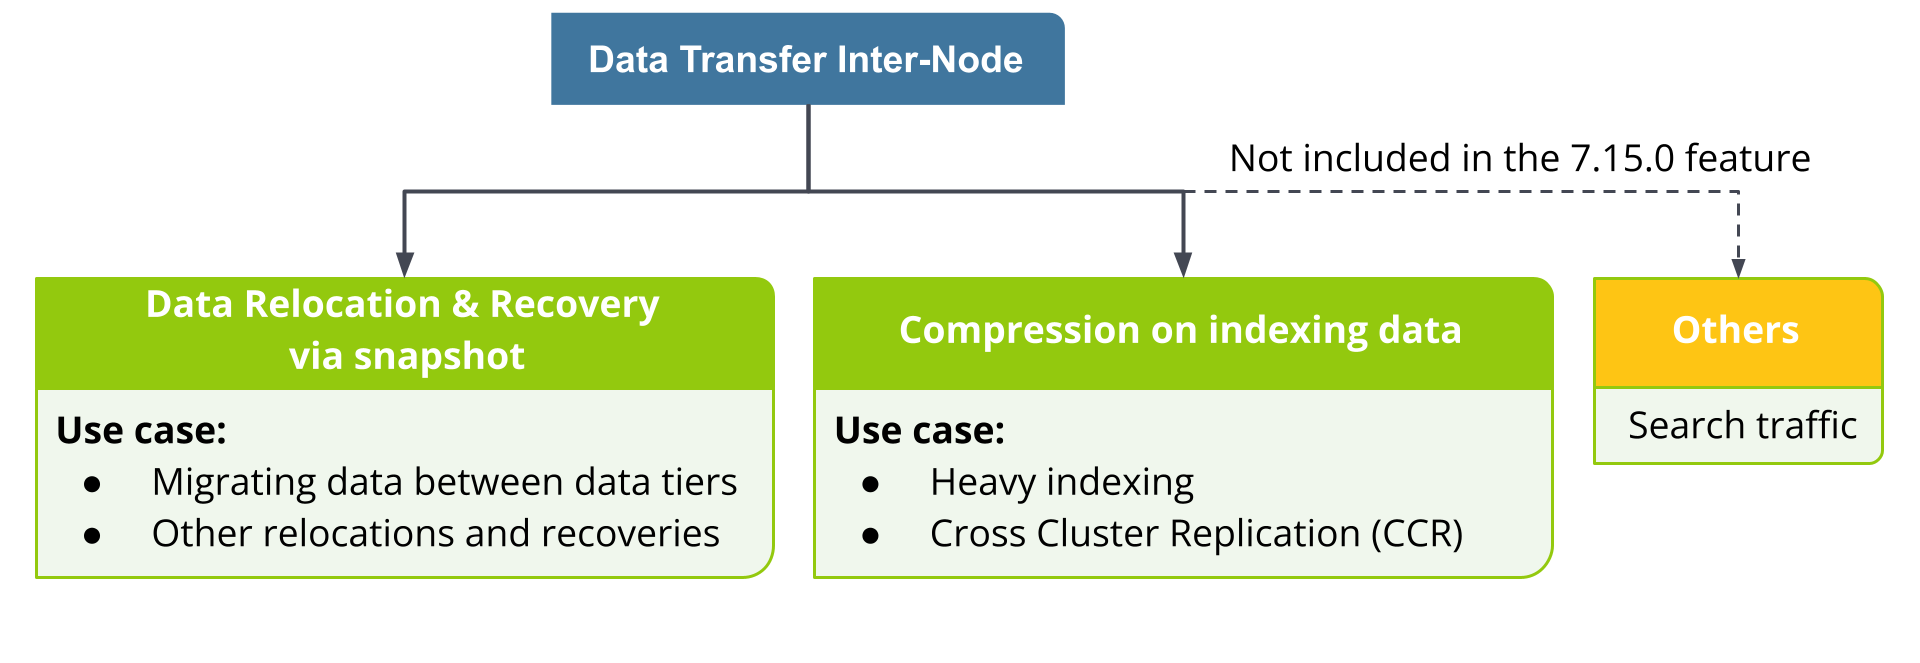 Data transfer inter-node reduction from two feature enhancements